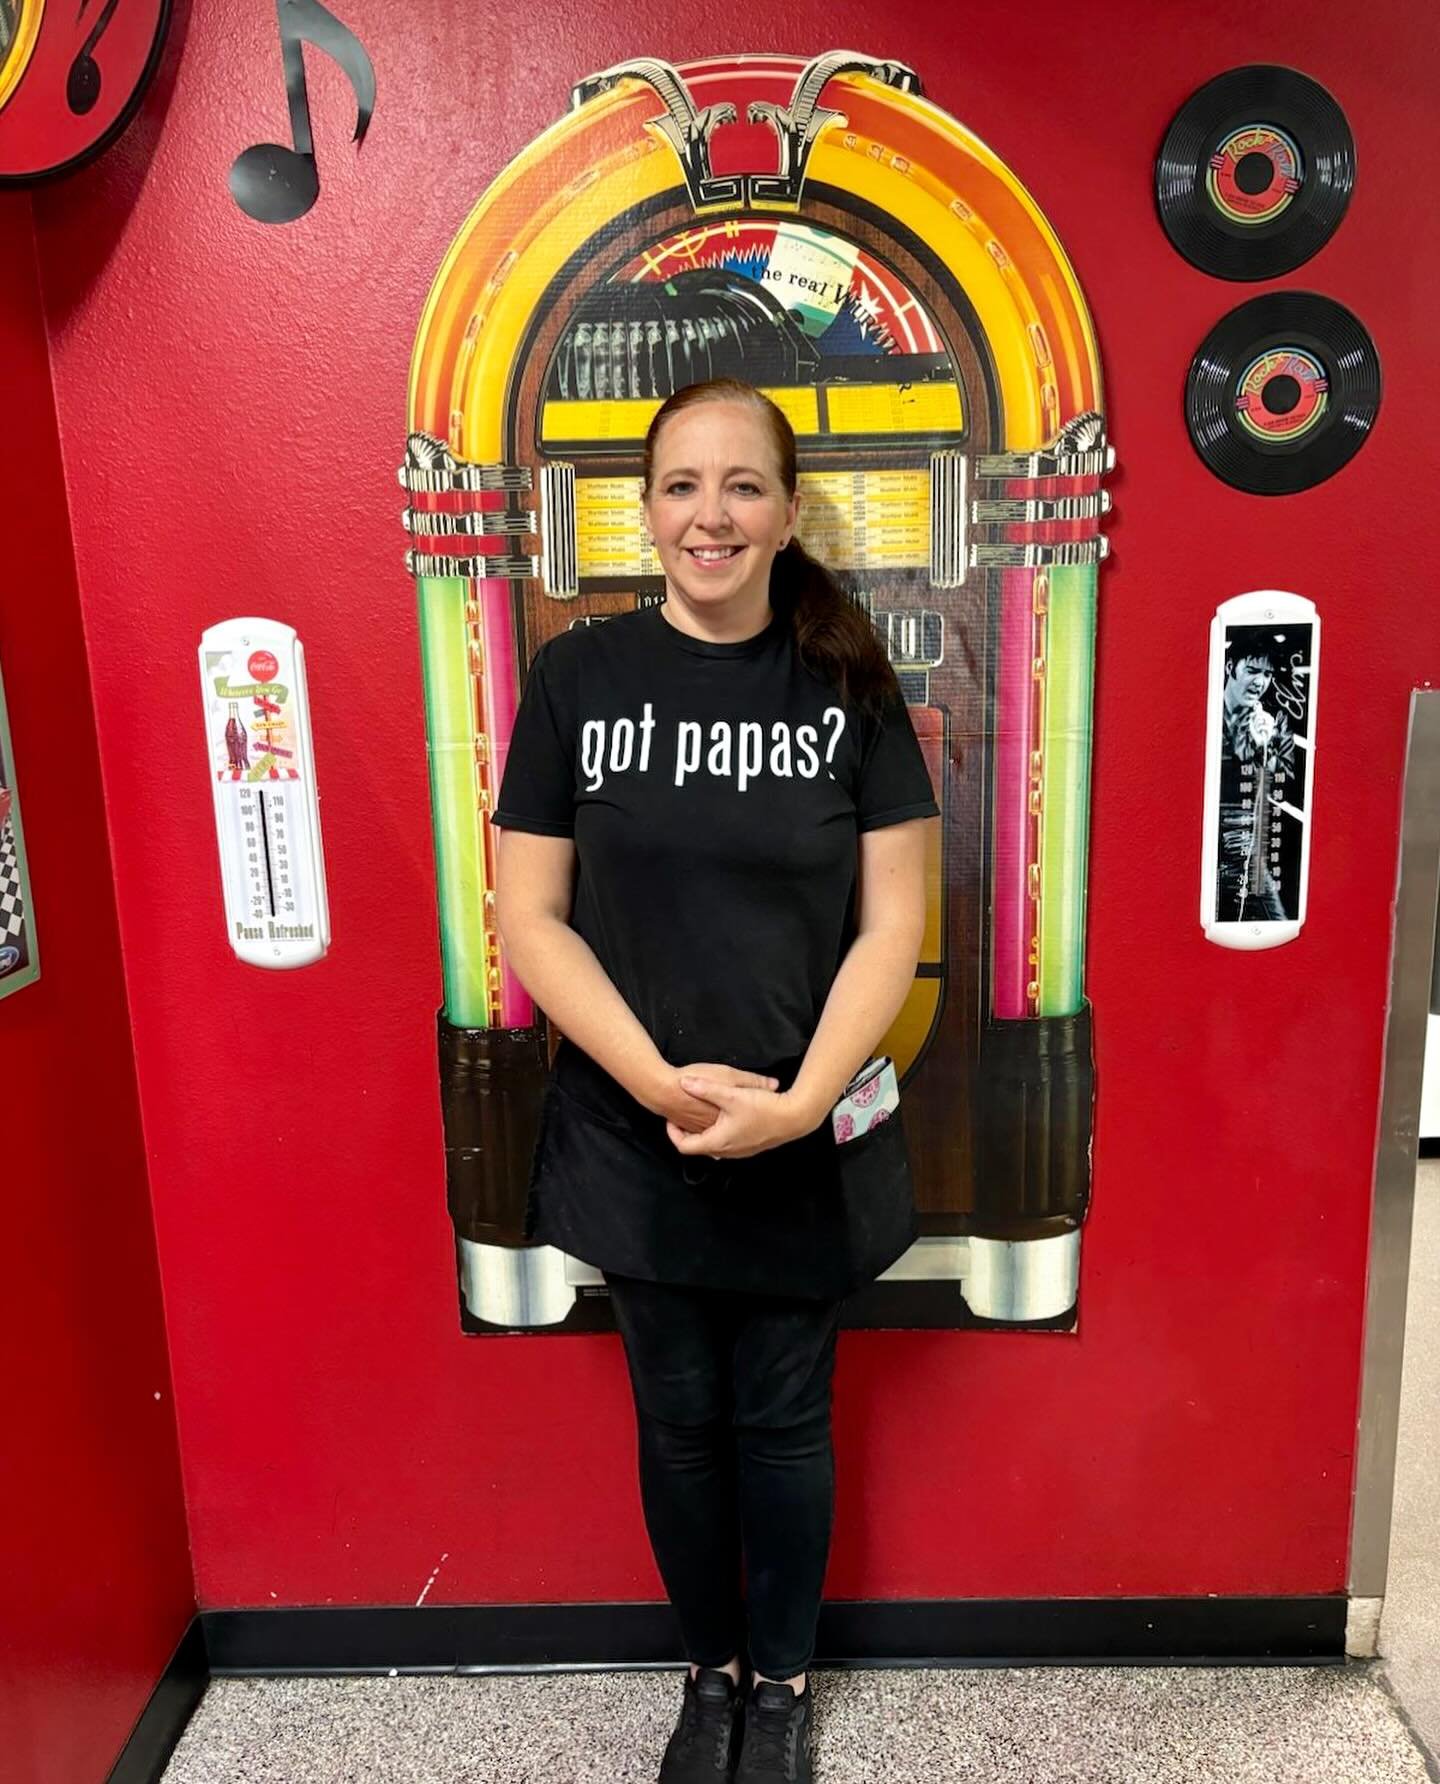 Congratulations to our amazing April employee of the month, Nancy Cordova! 

Her GM says &ldquo;Nancy is a five star employee, leads by example to every one in the store. She is so helpful and productive, just the best there is.&rdquo; 🥳 

Thank you